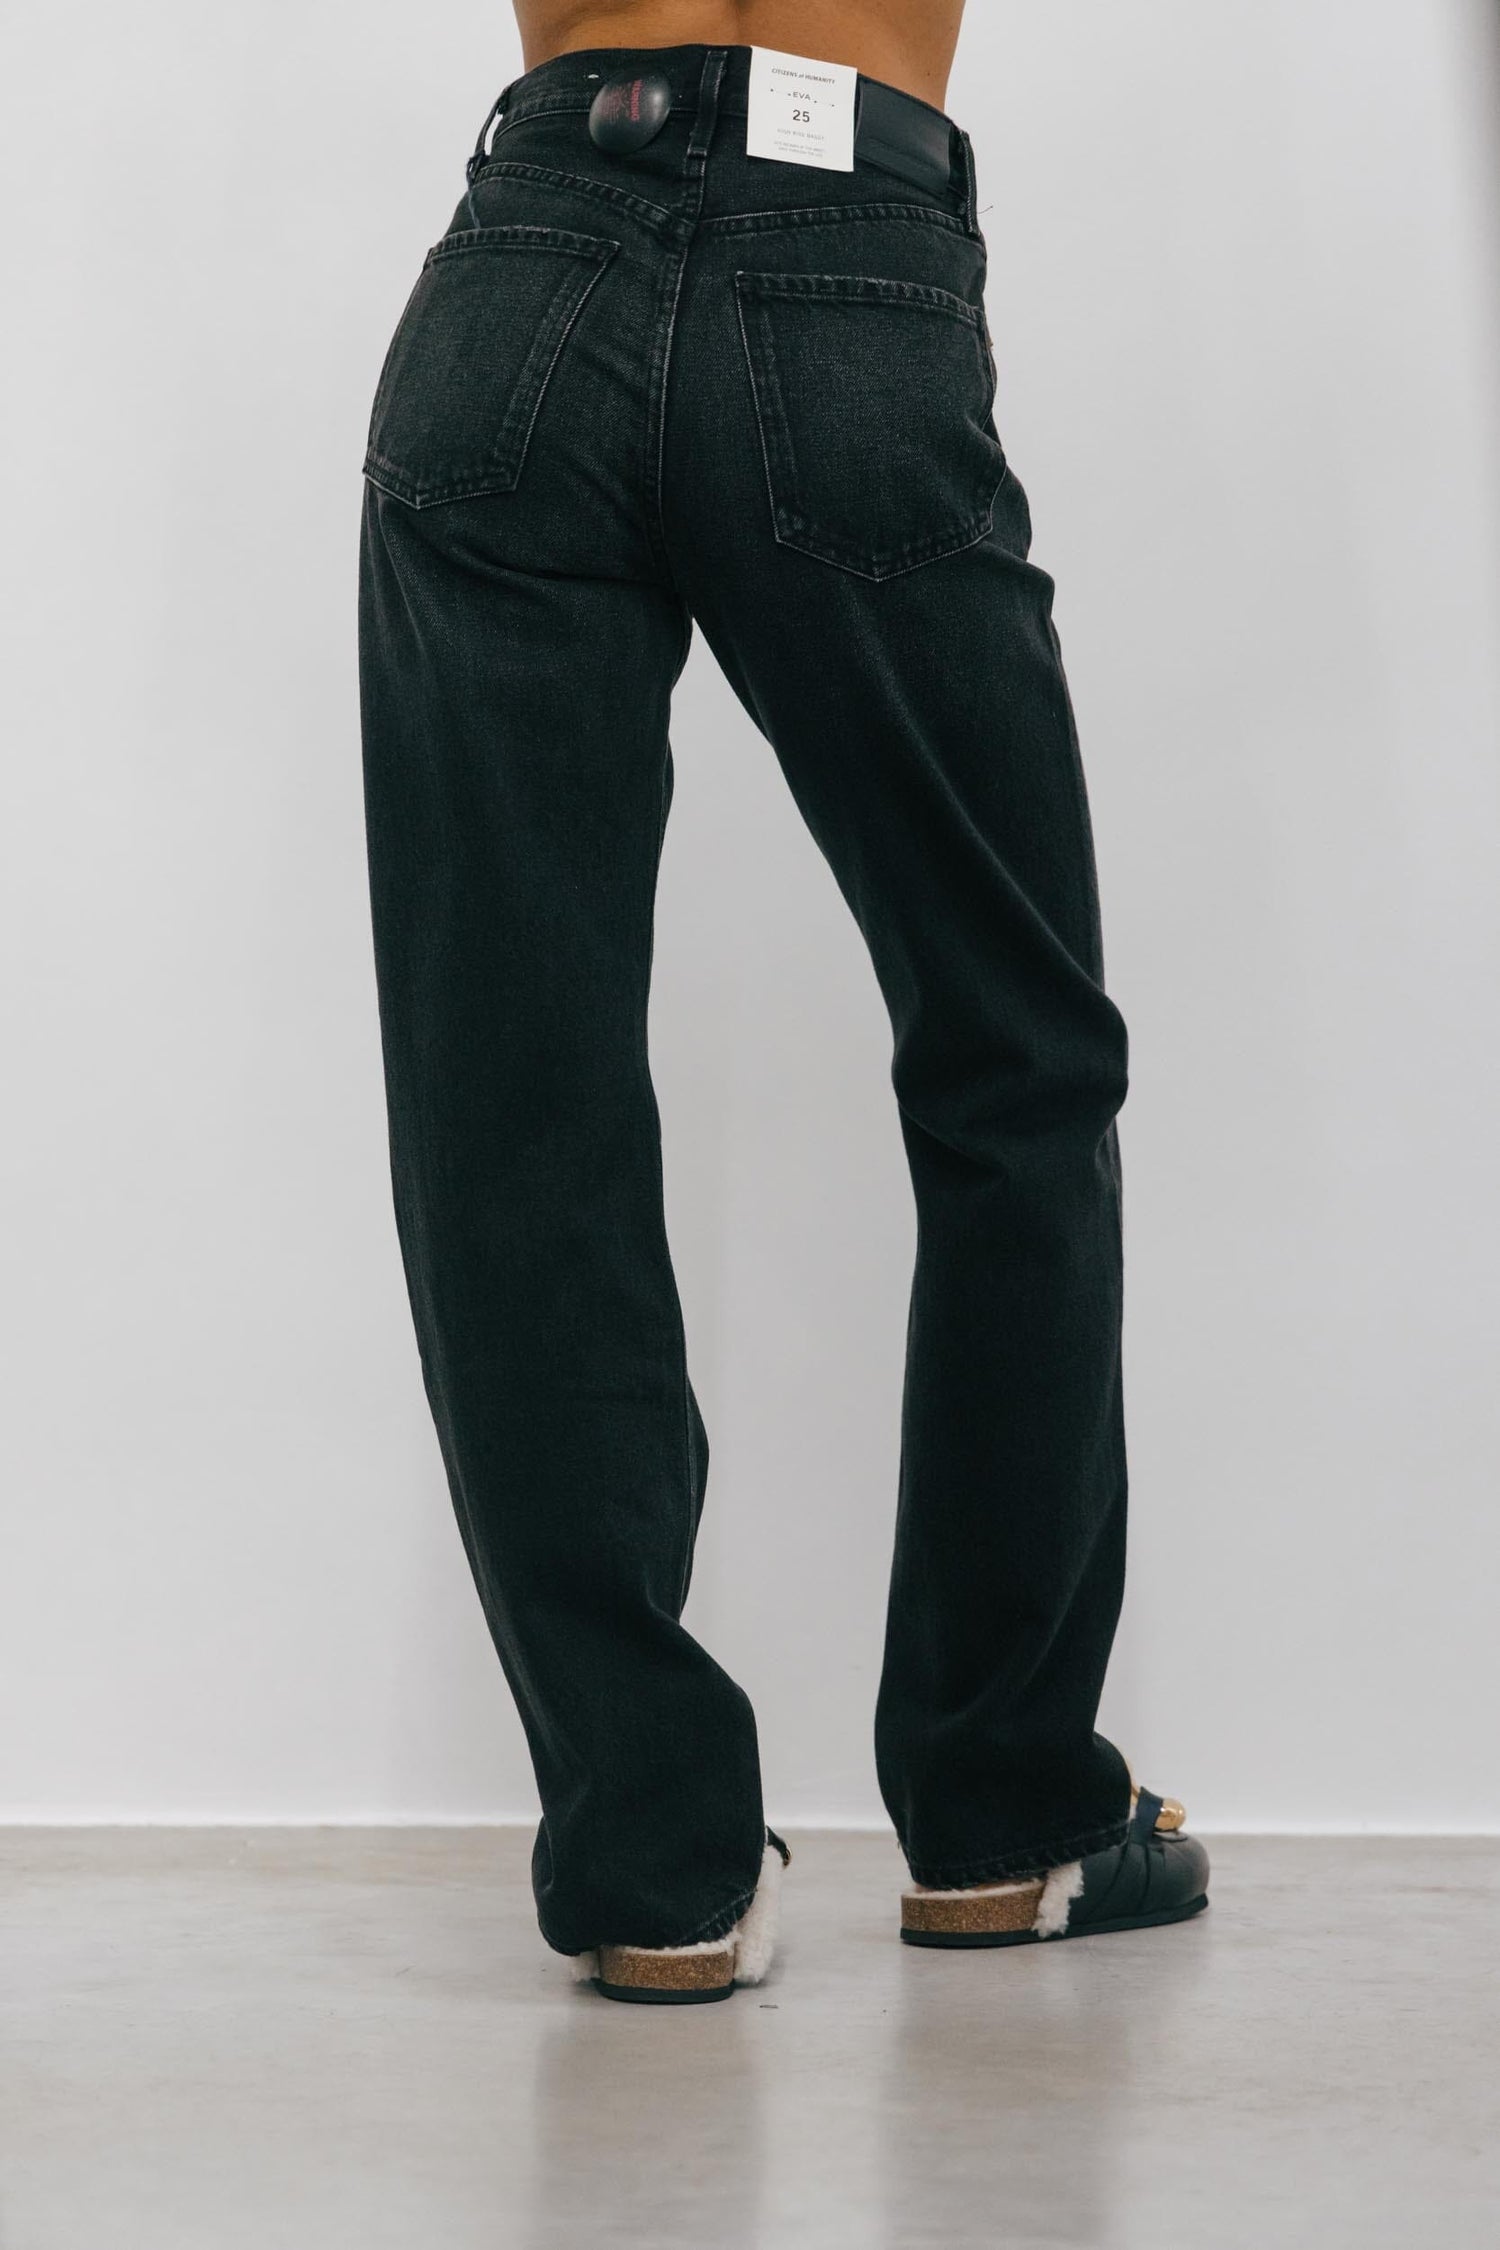 EVA RELAXED WIDE LEG JEANS IN BLK JEANS CITIZENS OF HUMANITY 